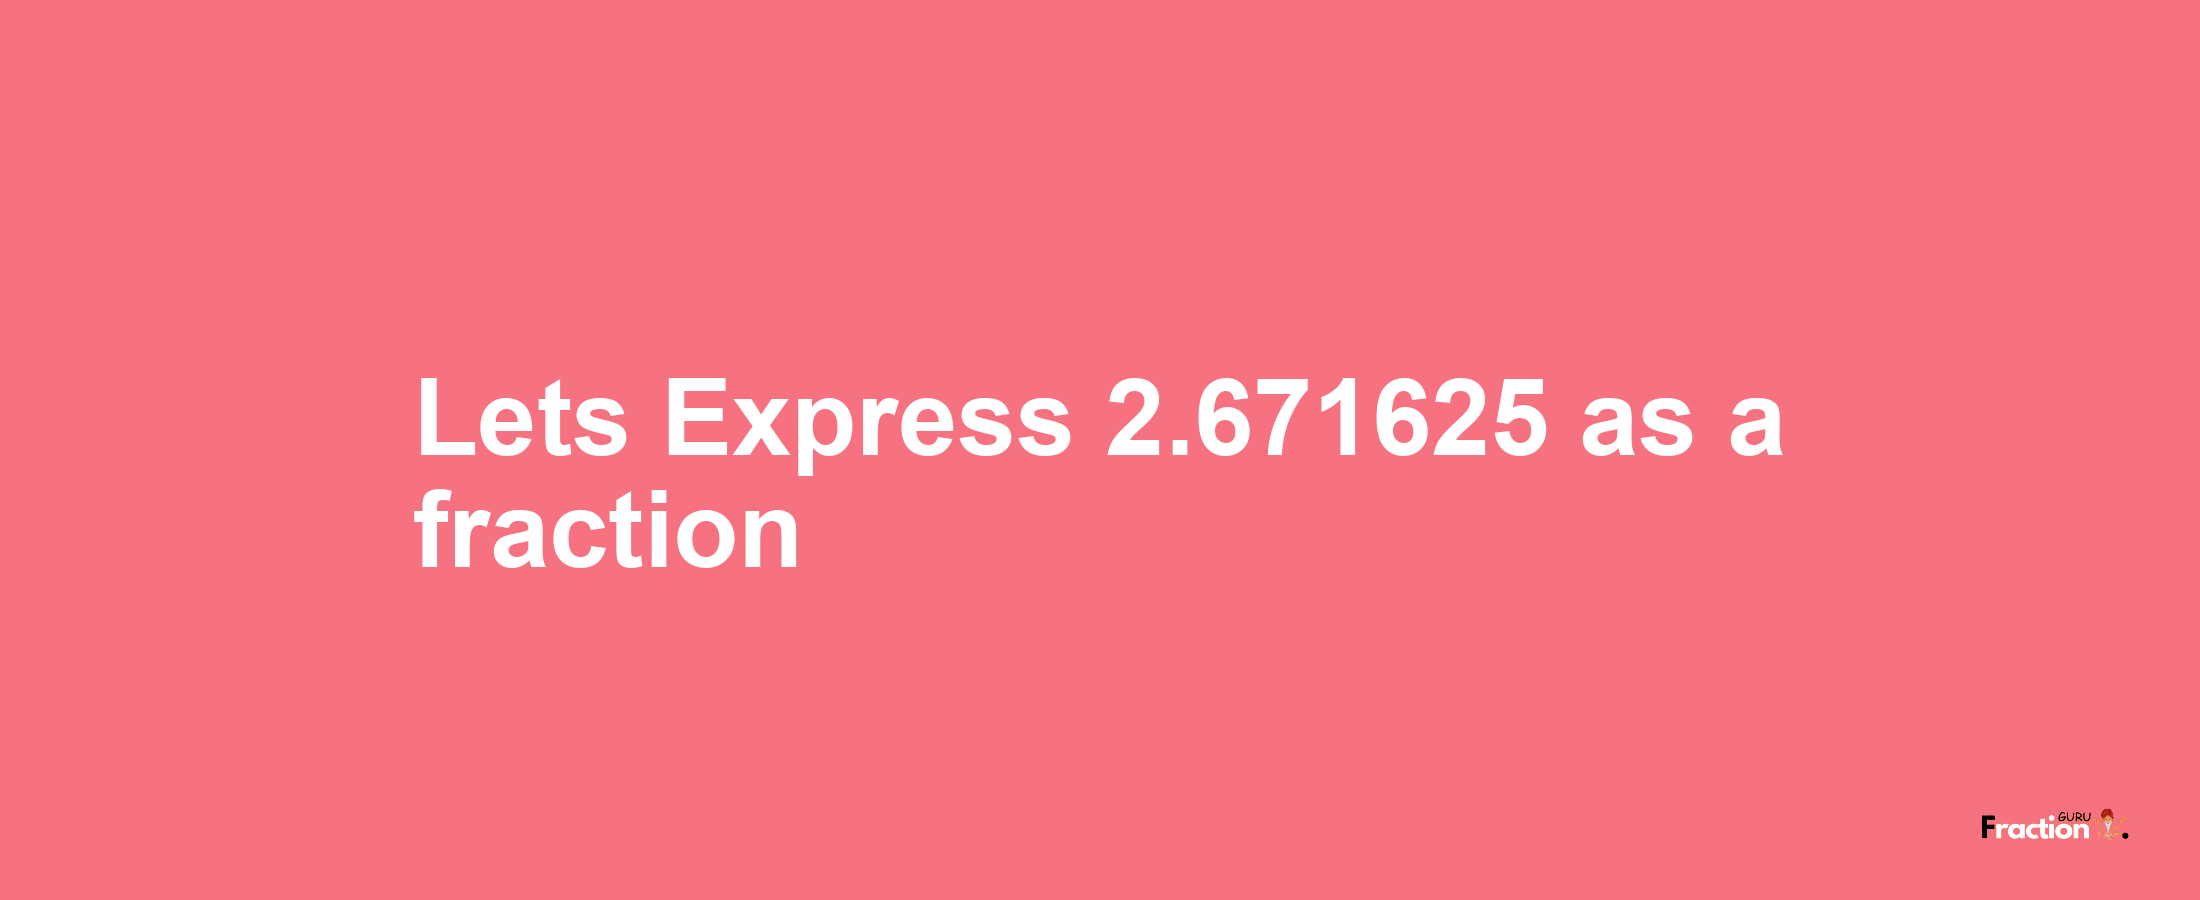 Lets Express 2.671625 as afraction